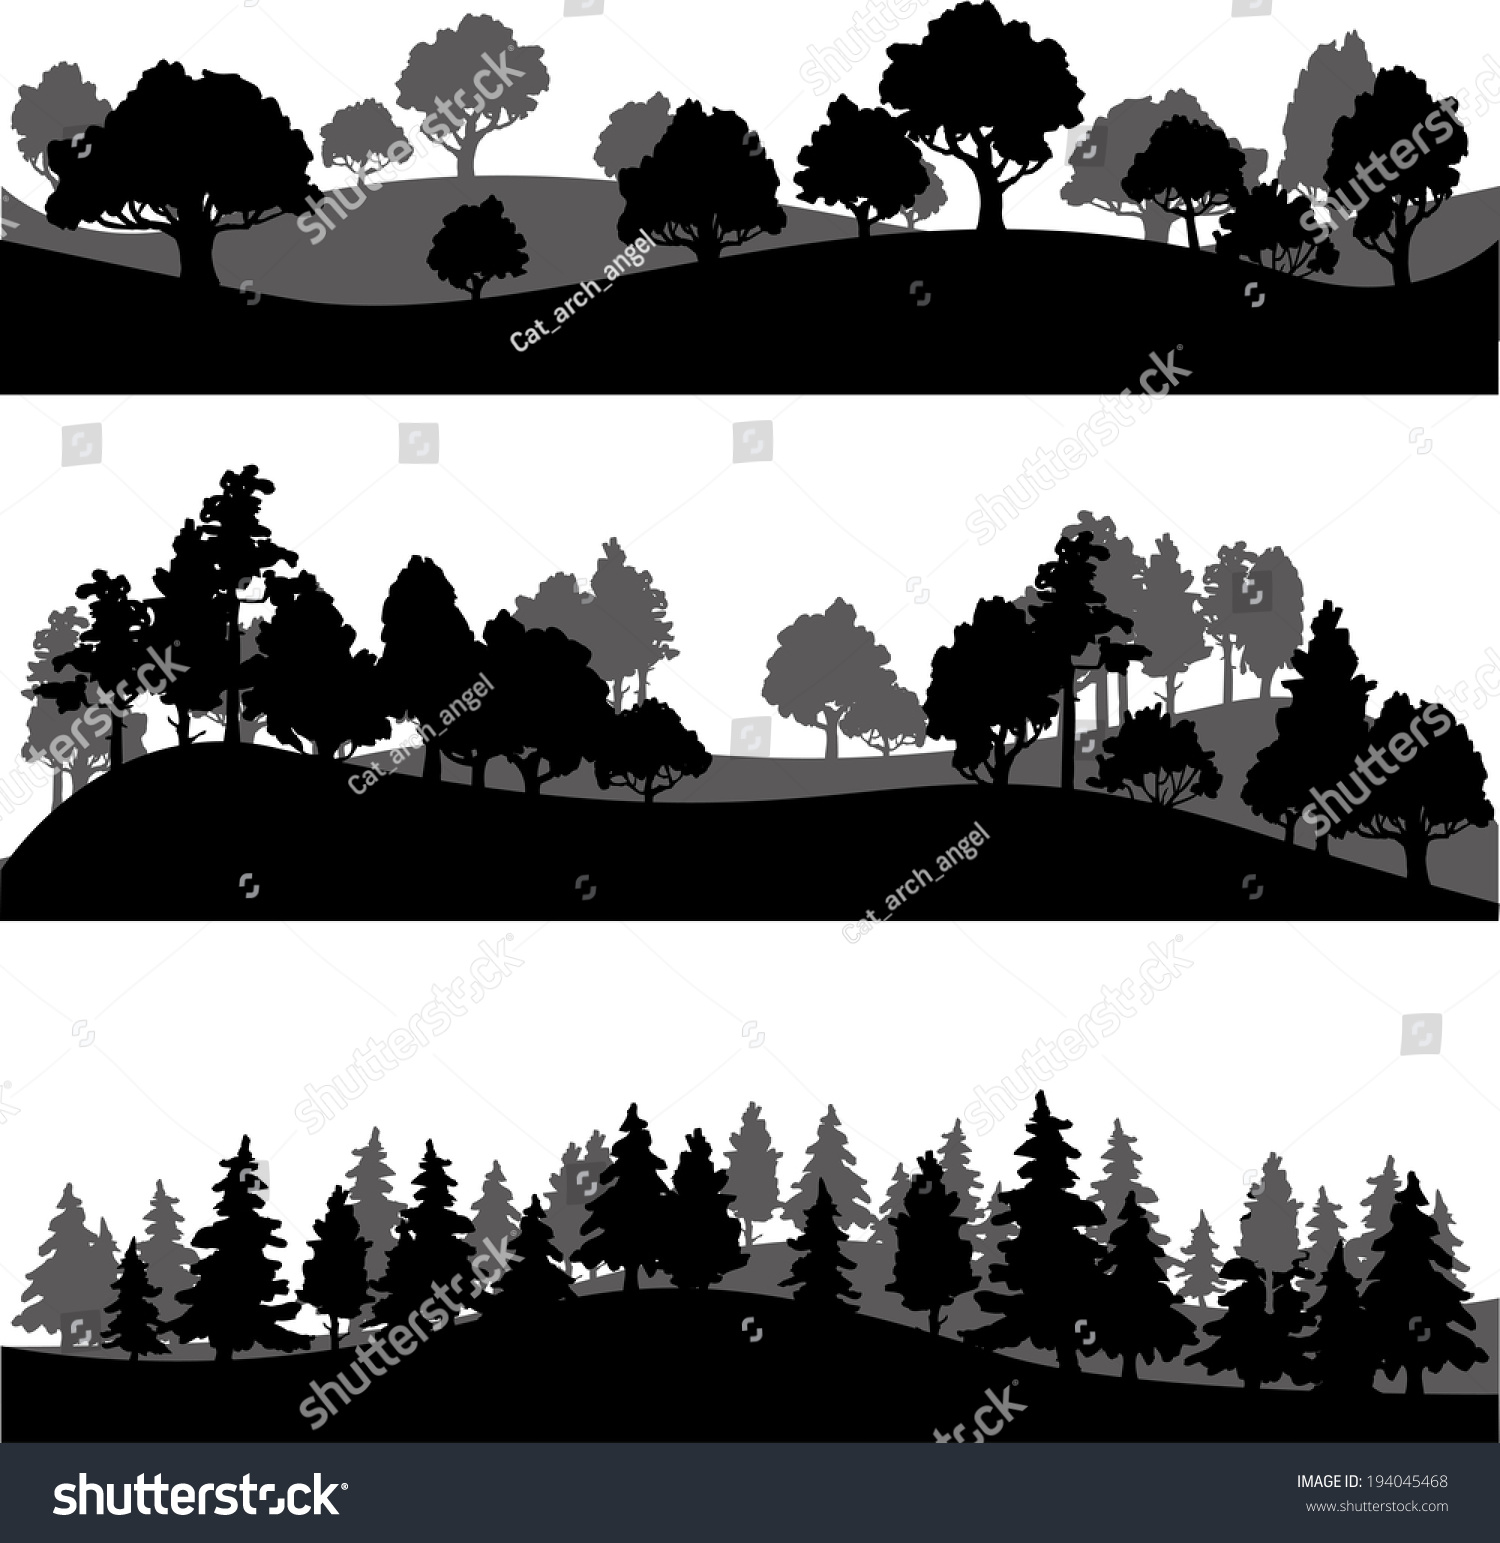 SVG of set of different silhouettes of landscape with trees, vector illustration svg